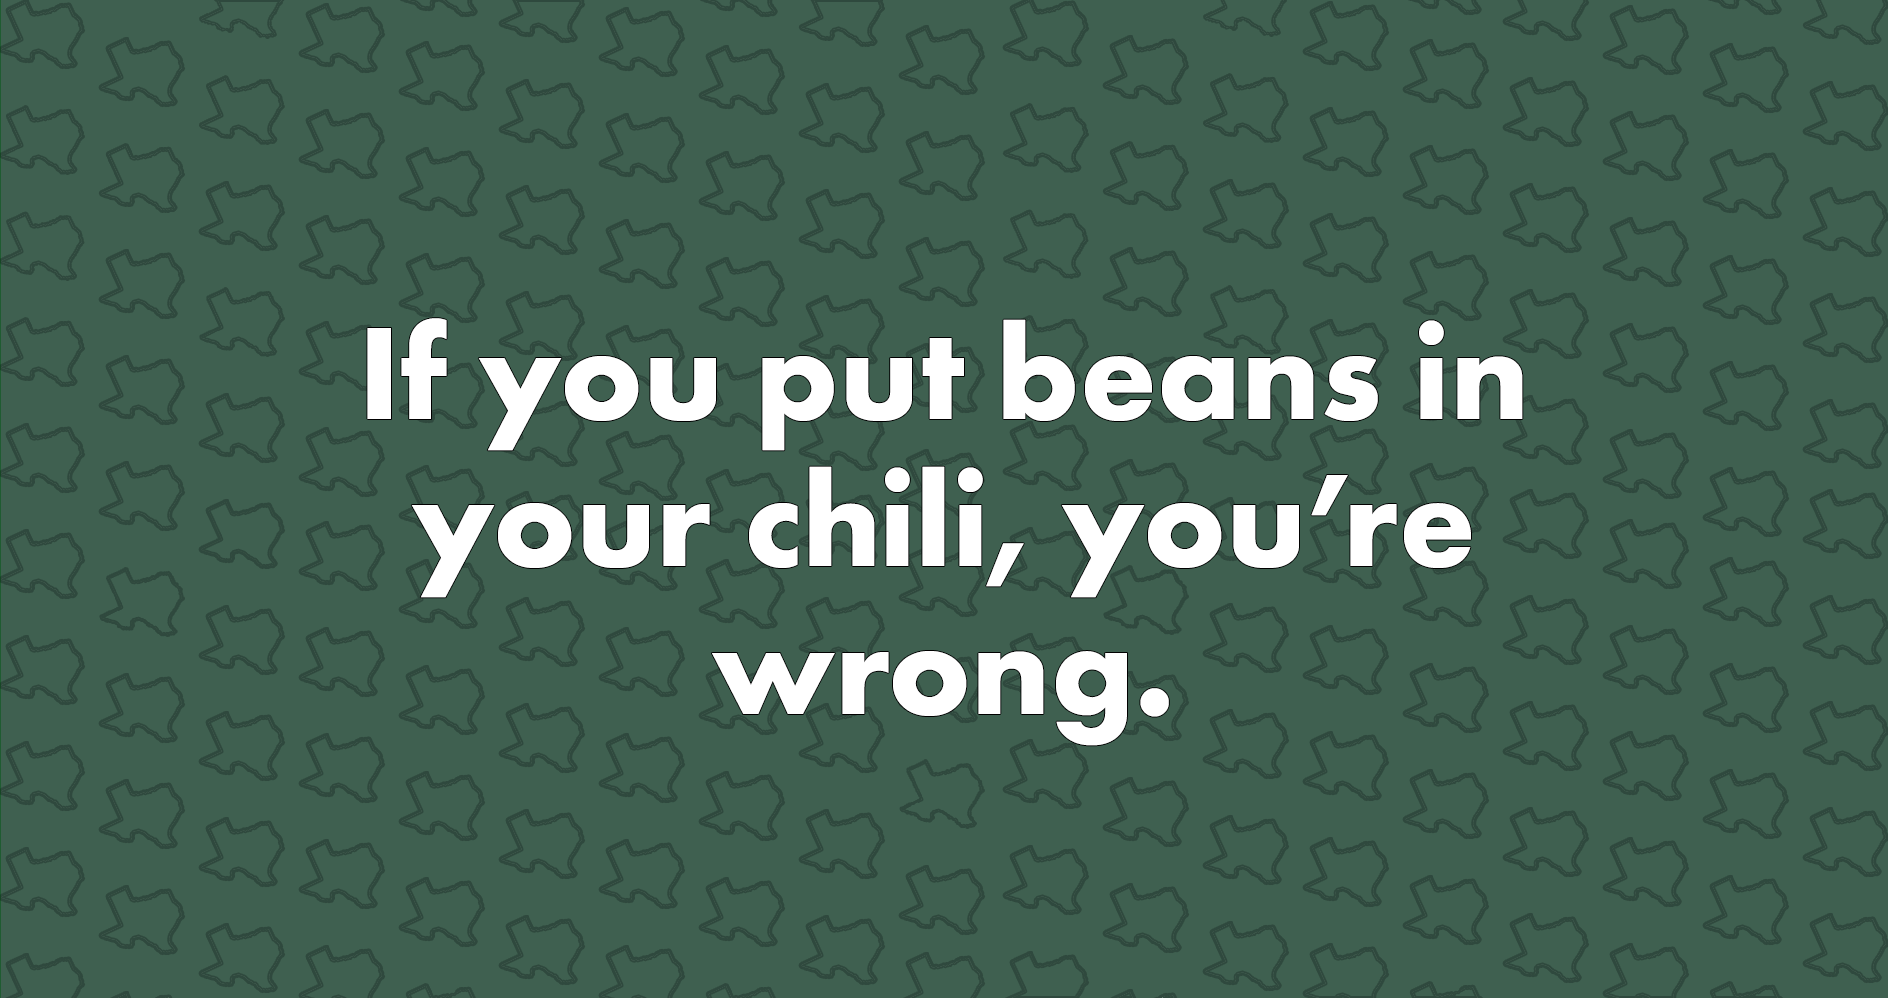 If you put beans in your chili, you're wrong